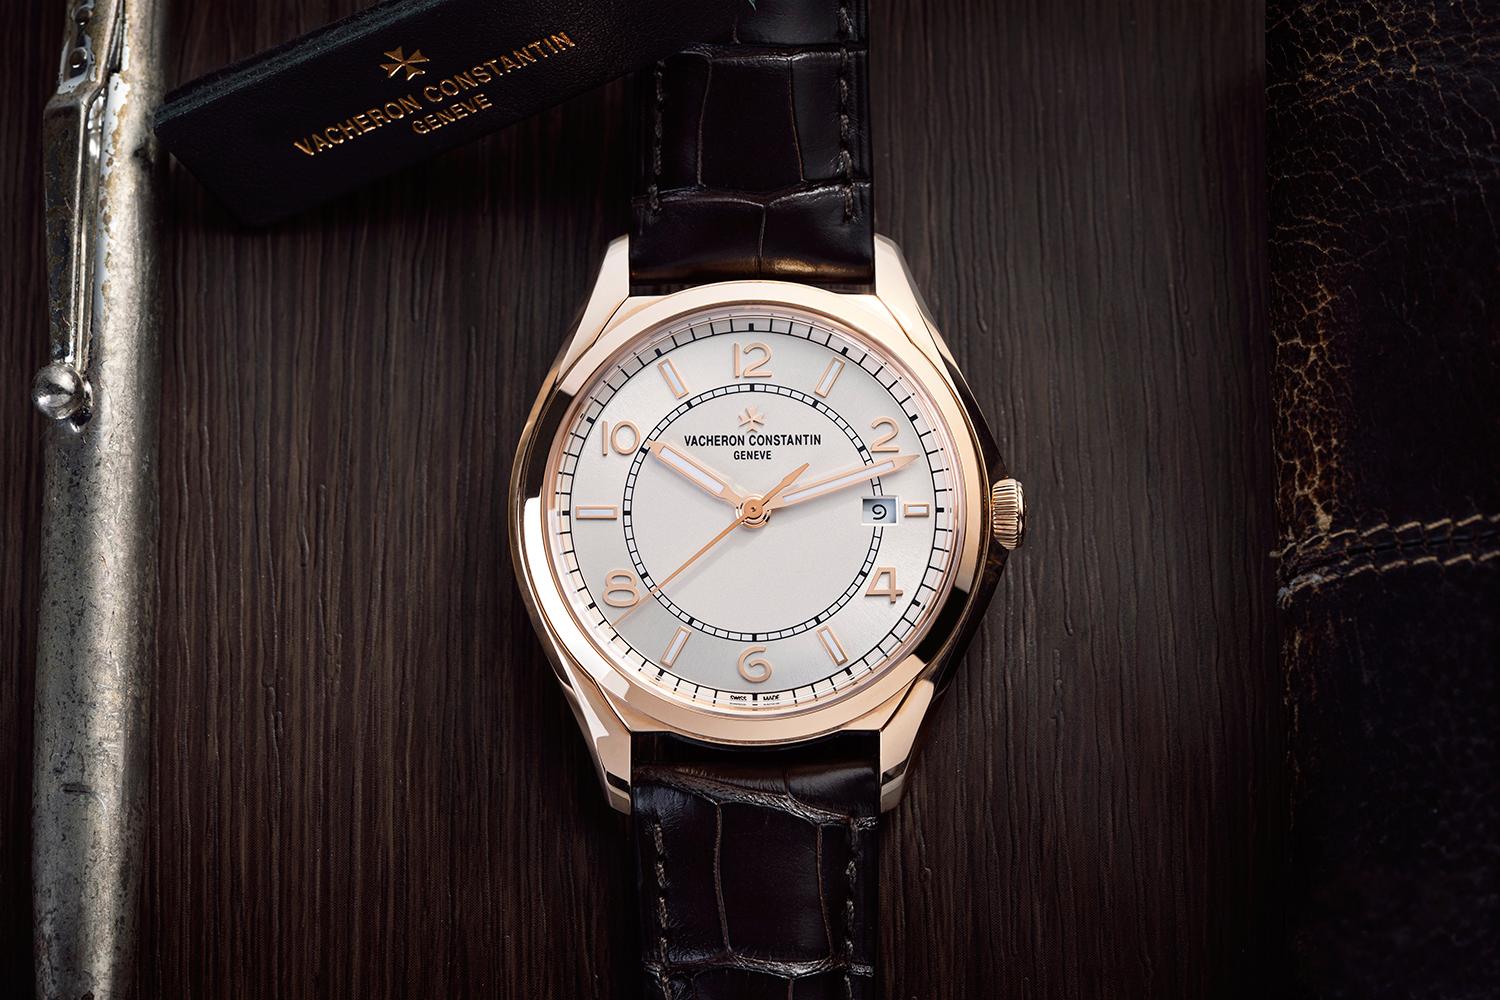 Vacheron Constantin: One of the Oldest Watch Manufacturers in the World